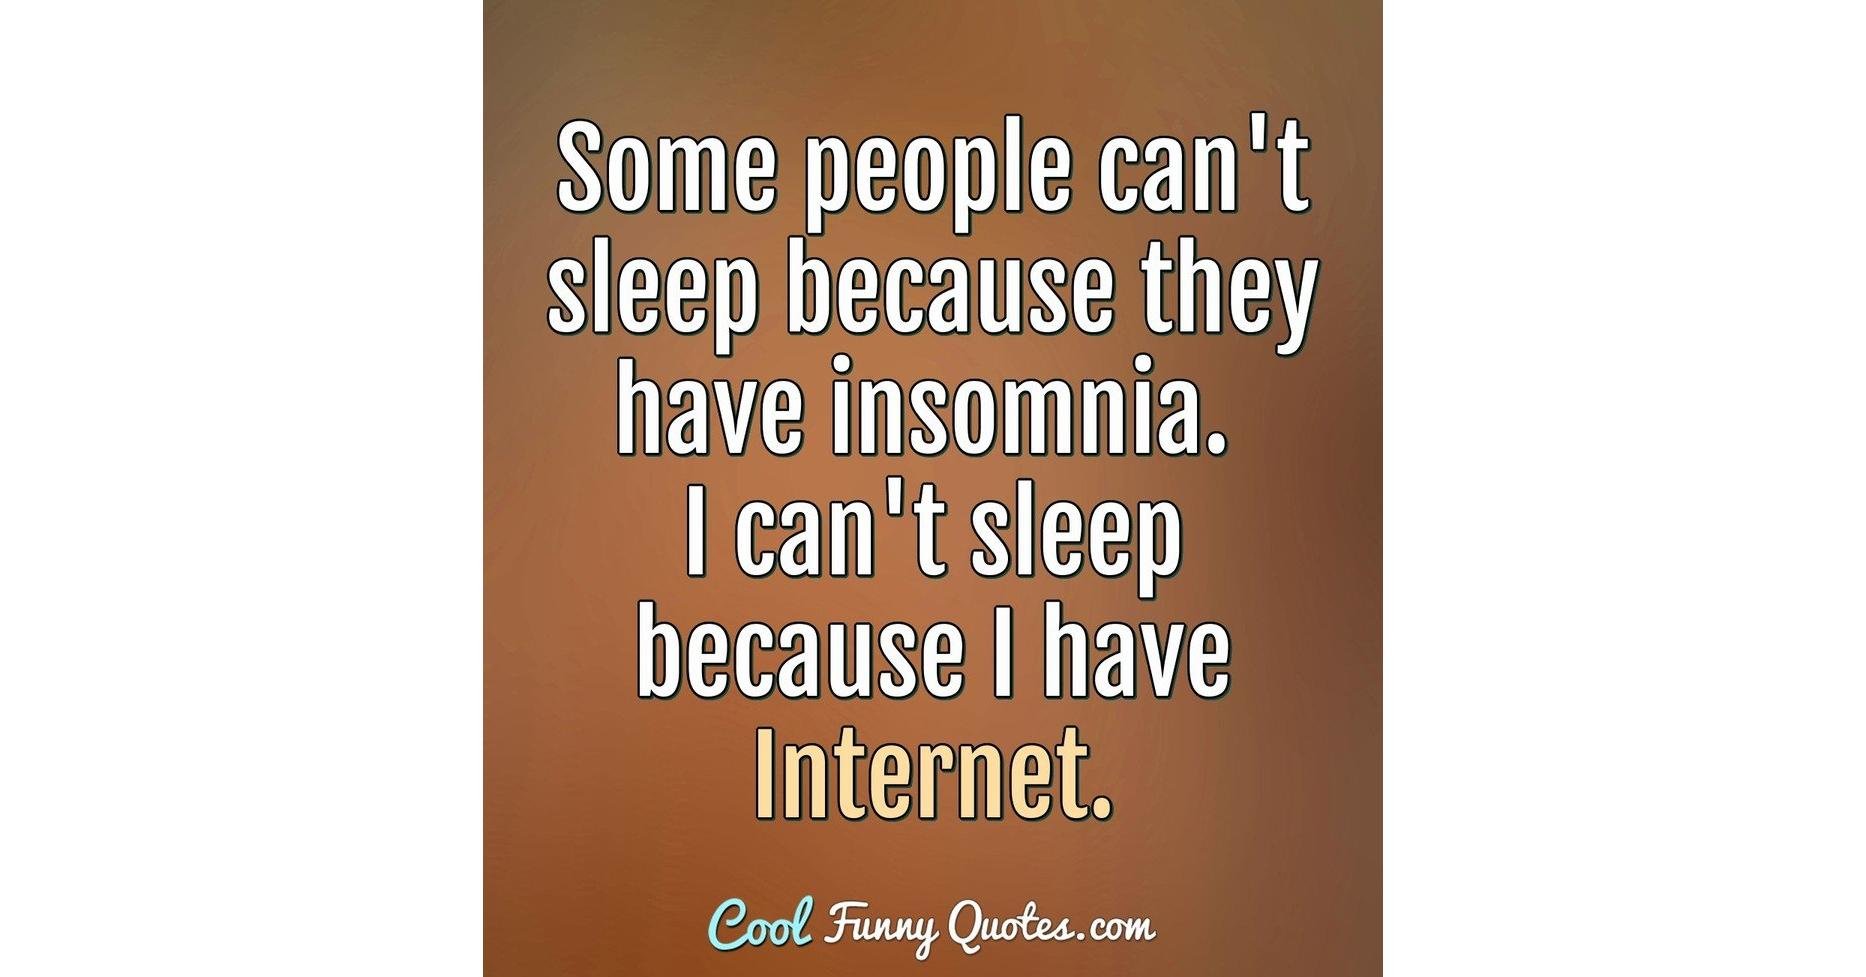 Some people can't sleep because they have insomnia. I can't sleep